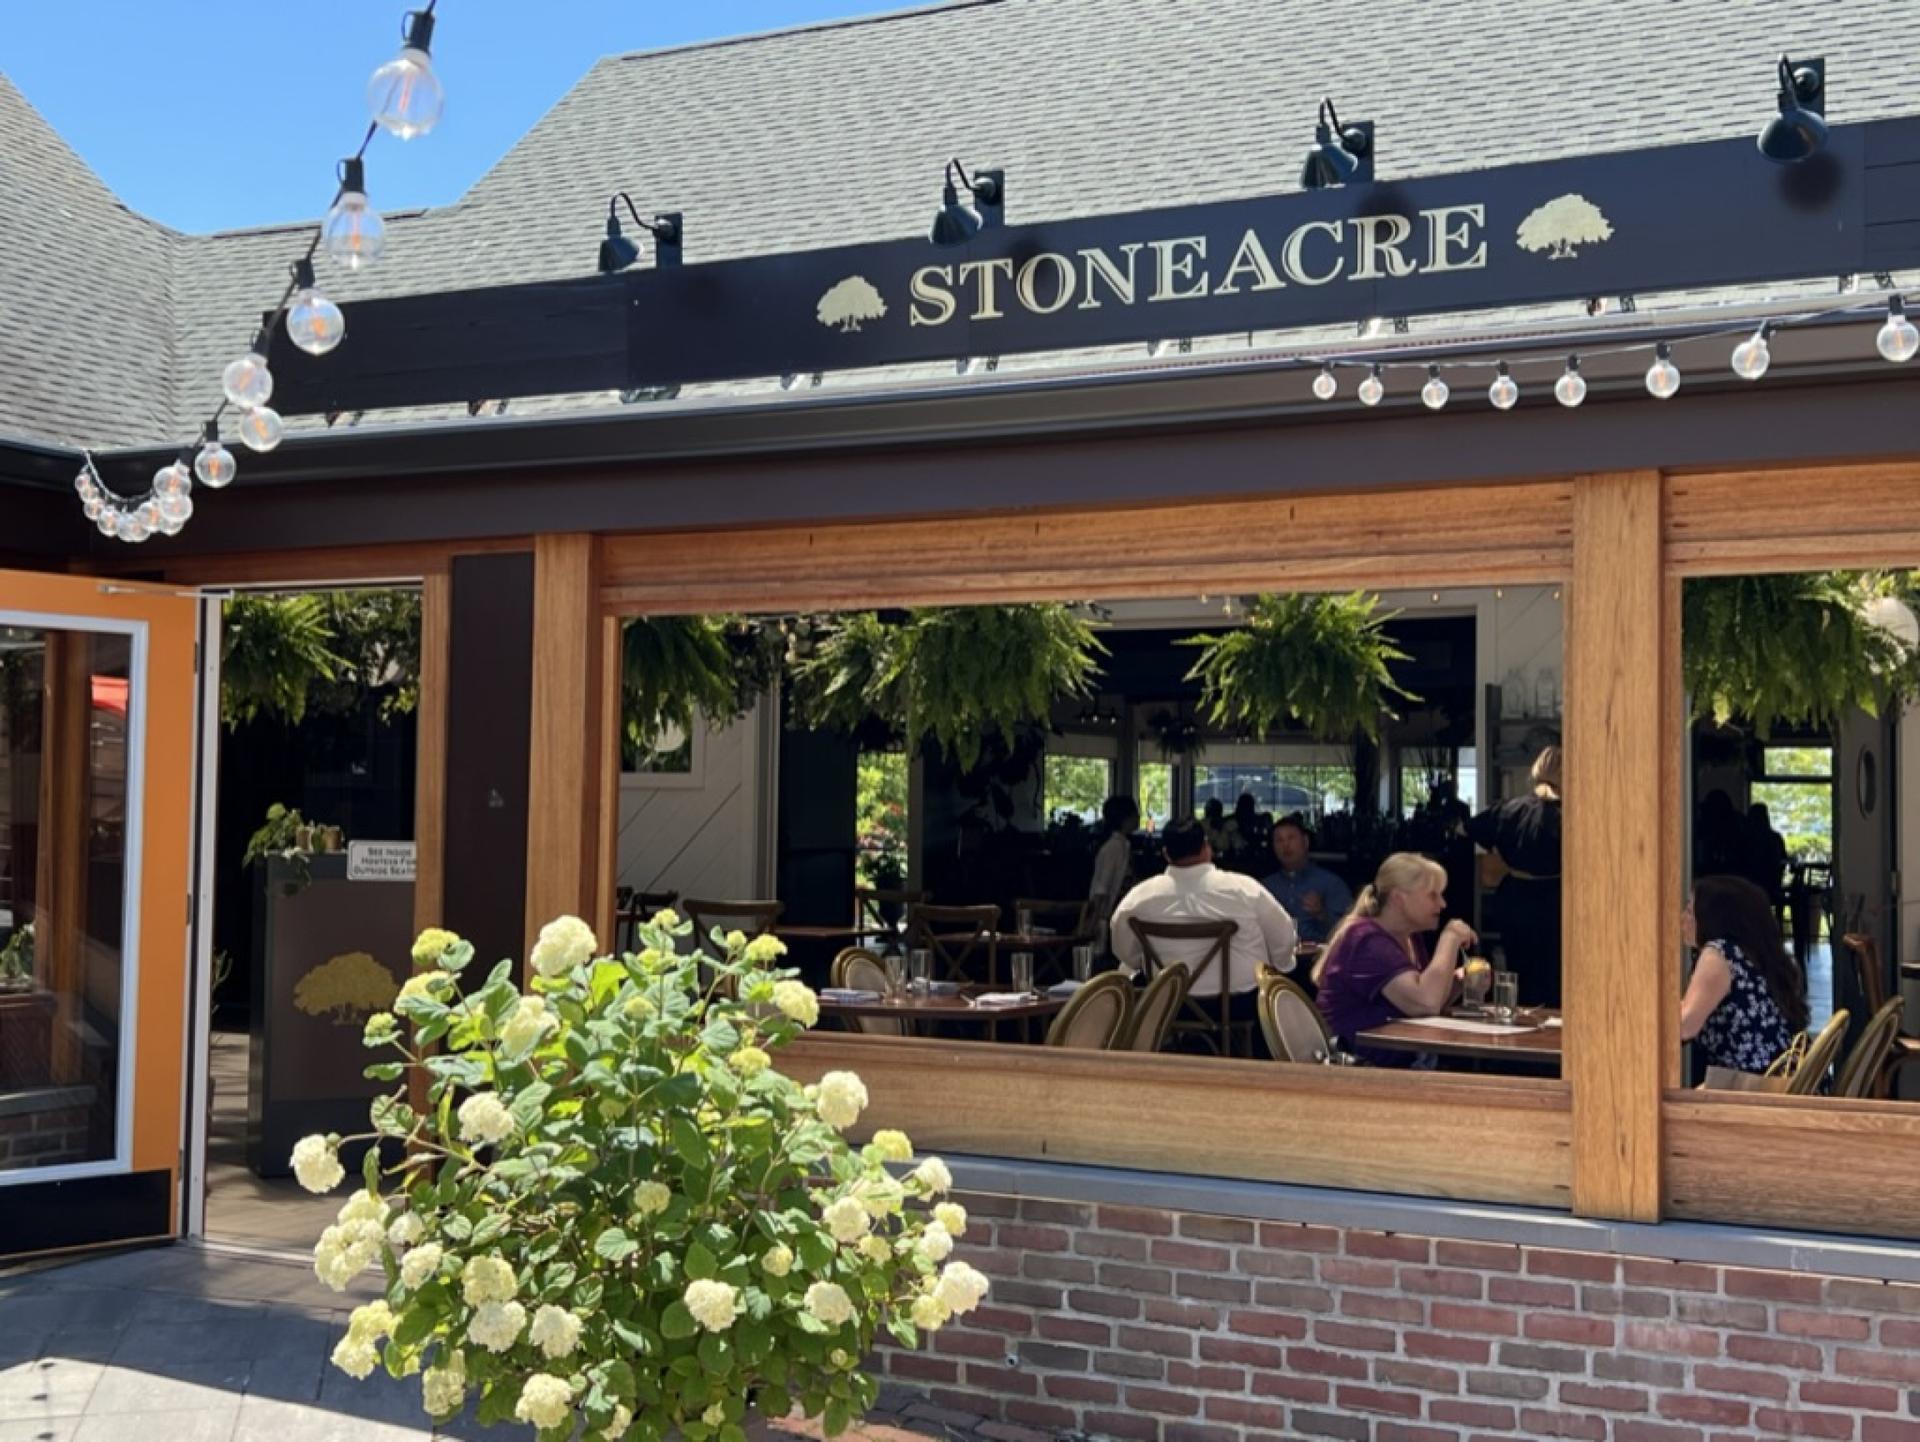 The Stoneacre Hospitality Group consists of two restaurants and a soon-to-be-opened bed and breakfast in Newport, Rhode Island